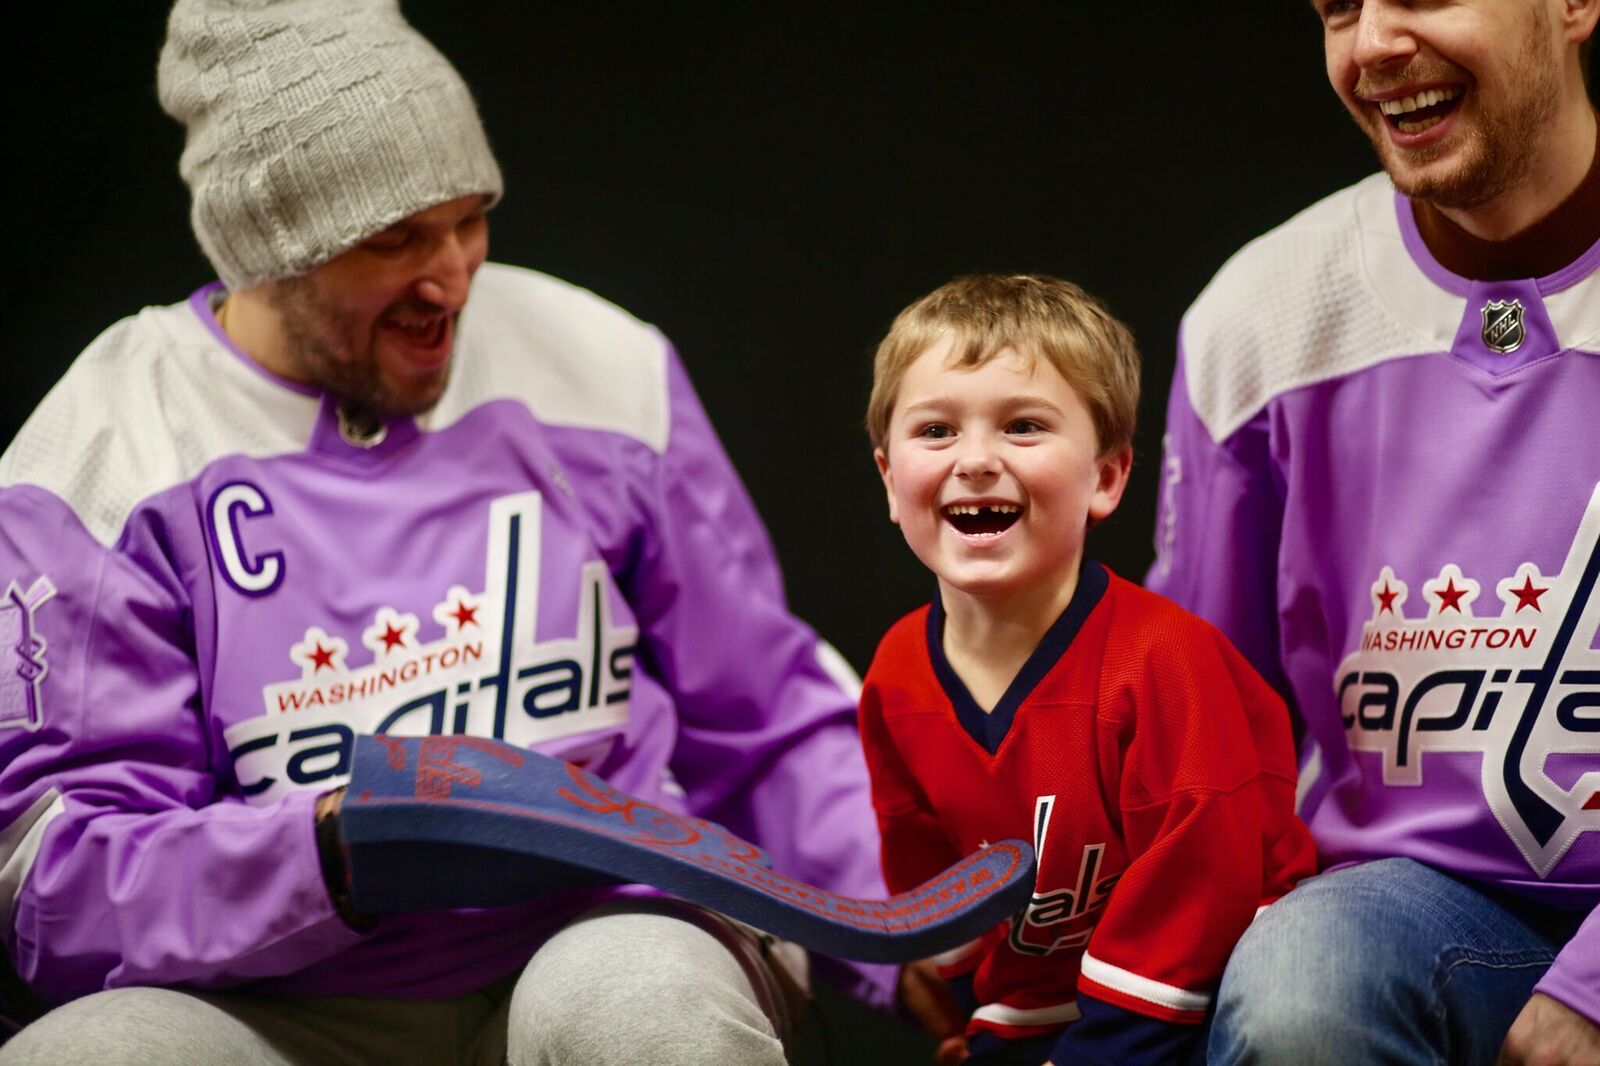 These Photos of the Caps Visiting Sick Kids Will Make Your Day Better